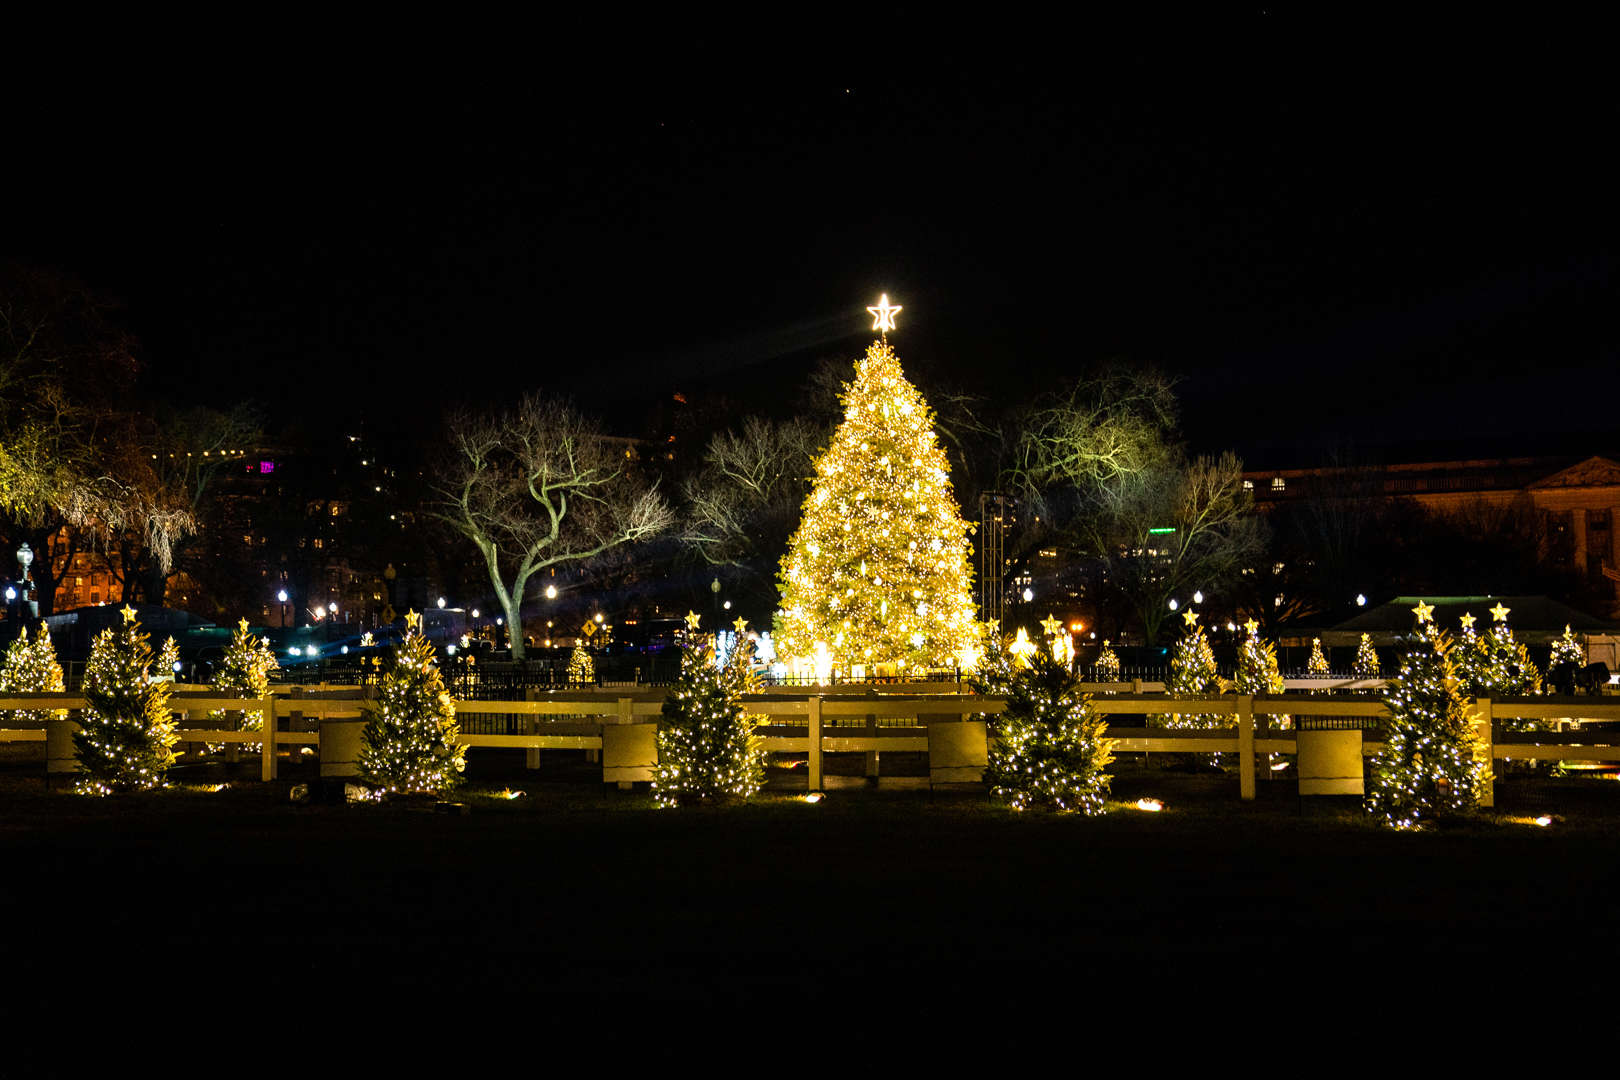 The 100th National Christmas Tree Lighting Ceremony at the Ellipse in November.